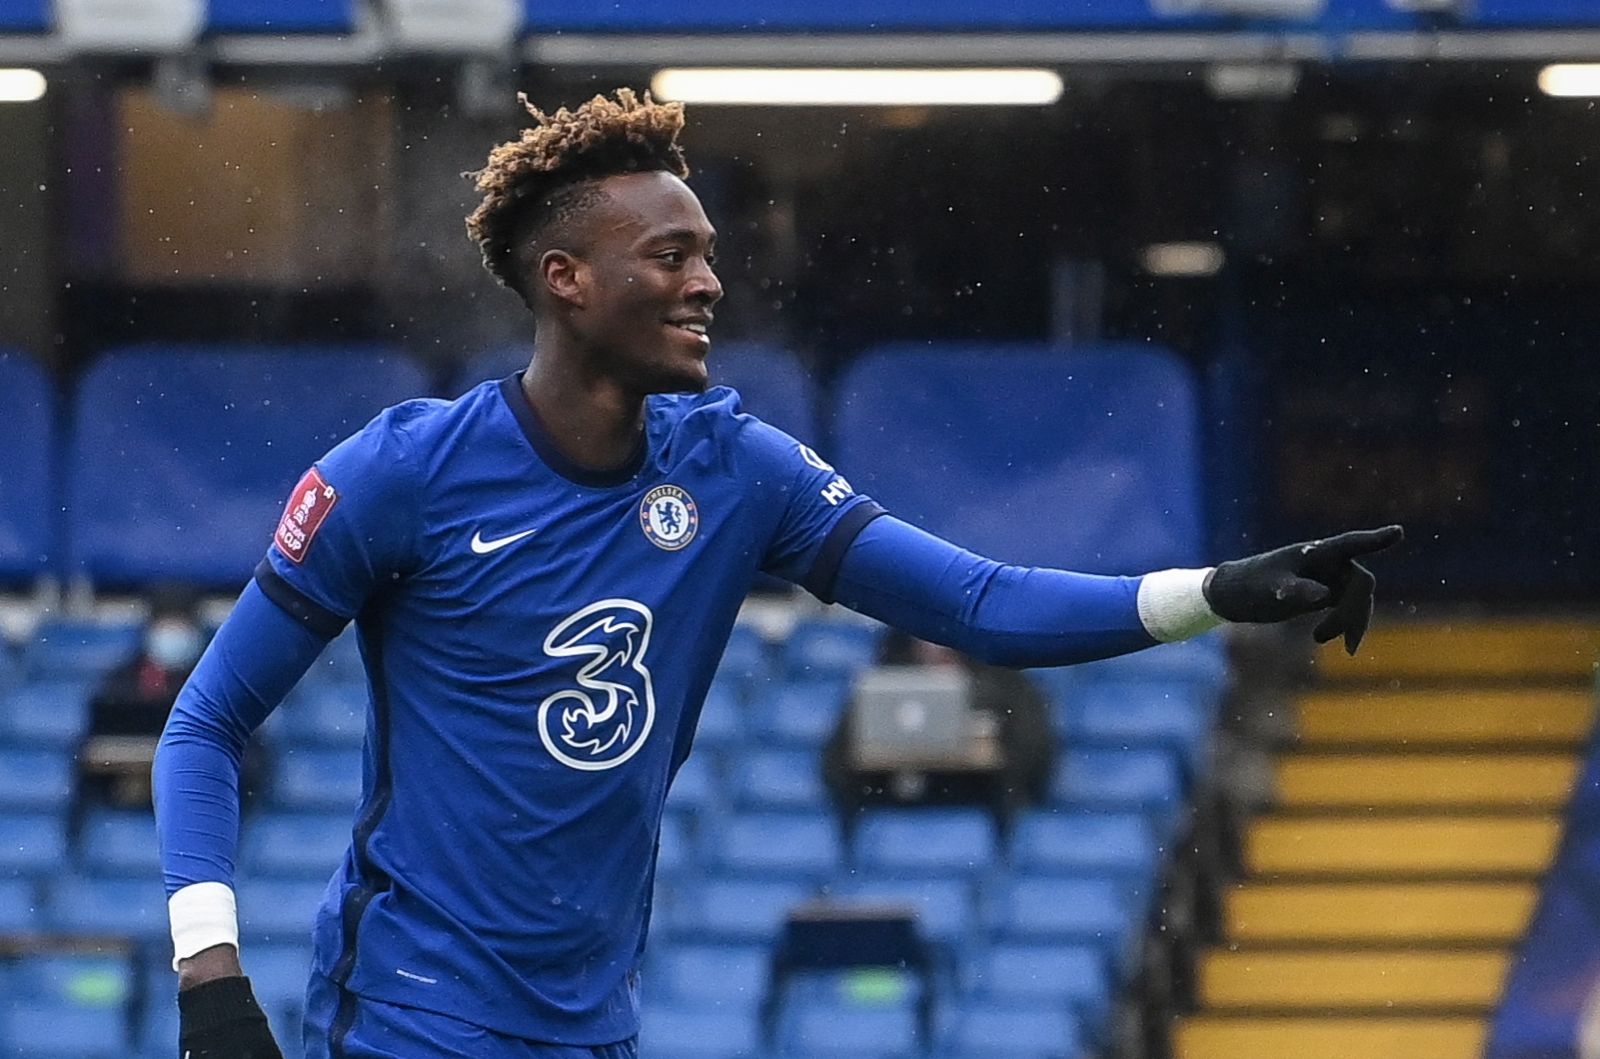 epa08961922 Tammy Abraham of Chelsea celebrates after scoring during the English FA Cup fourth round match between Chelsea and Luton Town in London, Britain, 24 January 2021.  EPA/NEIL HALL EDITORIAL USE ONLY. No use with unauthorized audio, video, data, fixture lists, club/league logos or 'live' services. Online in-match use limited to 120 images, no video emulation. No use in betting, games or single club/league/player publications.